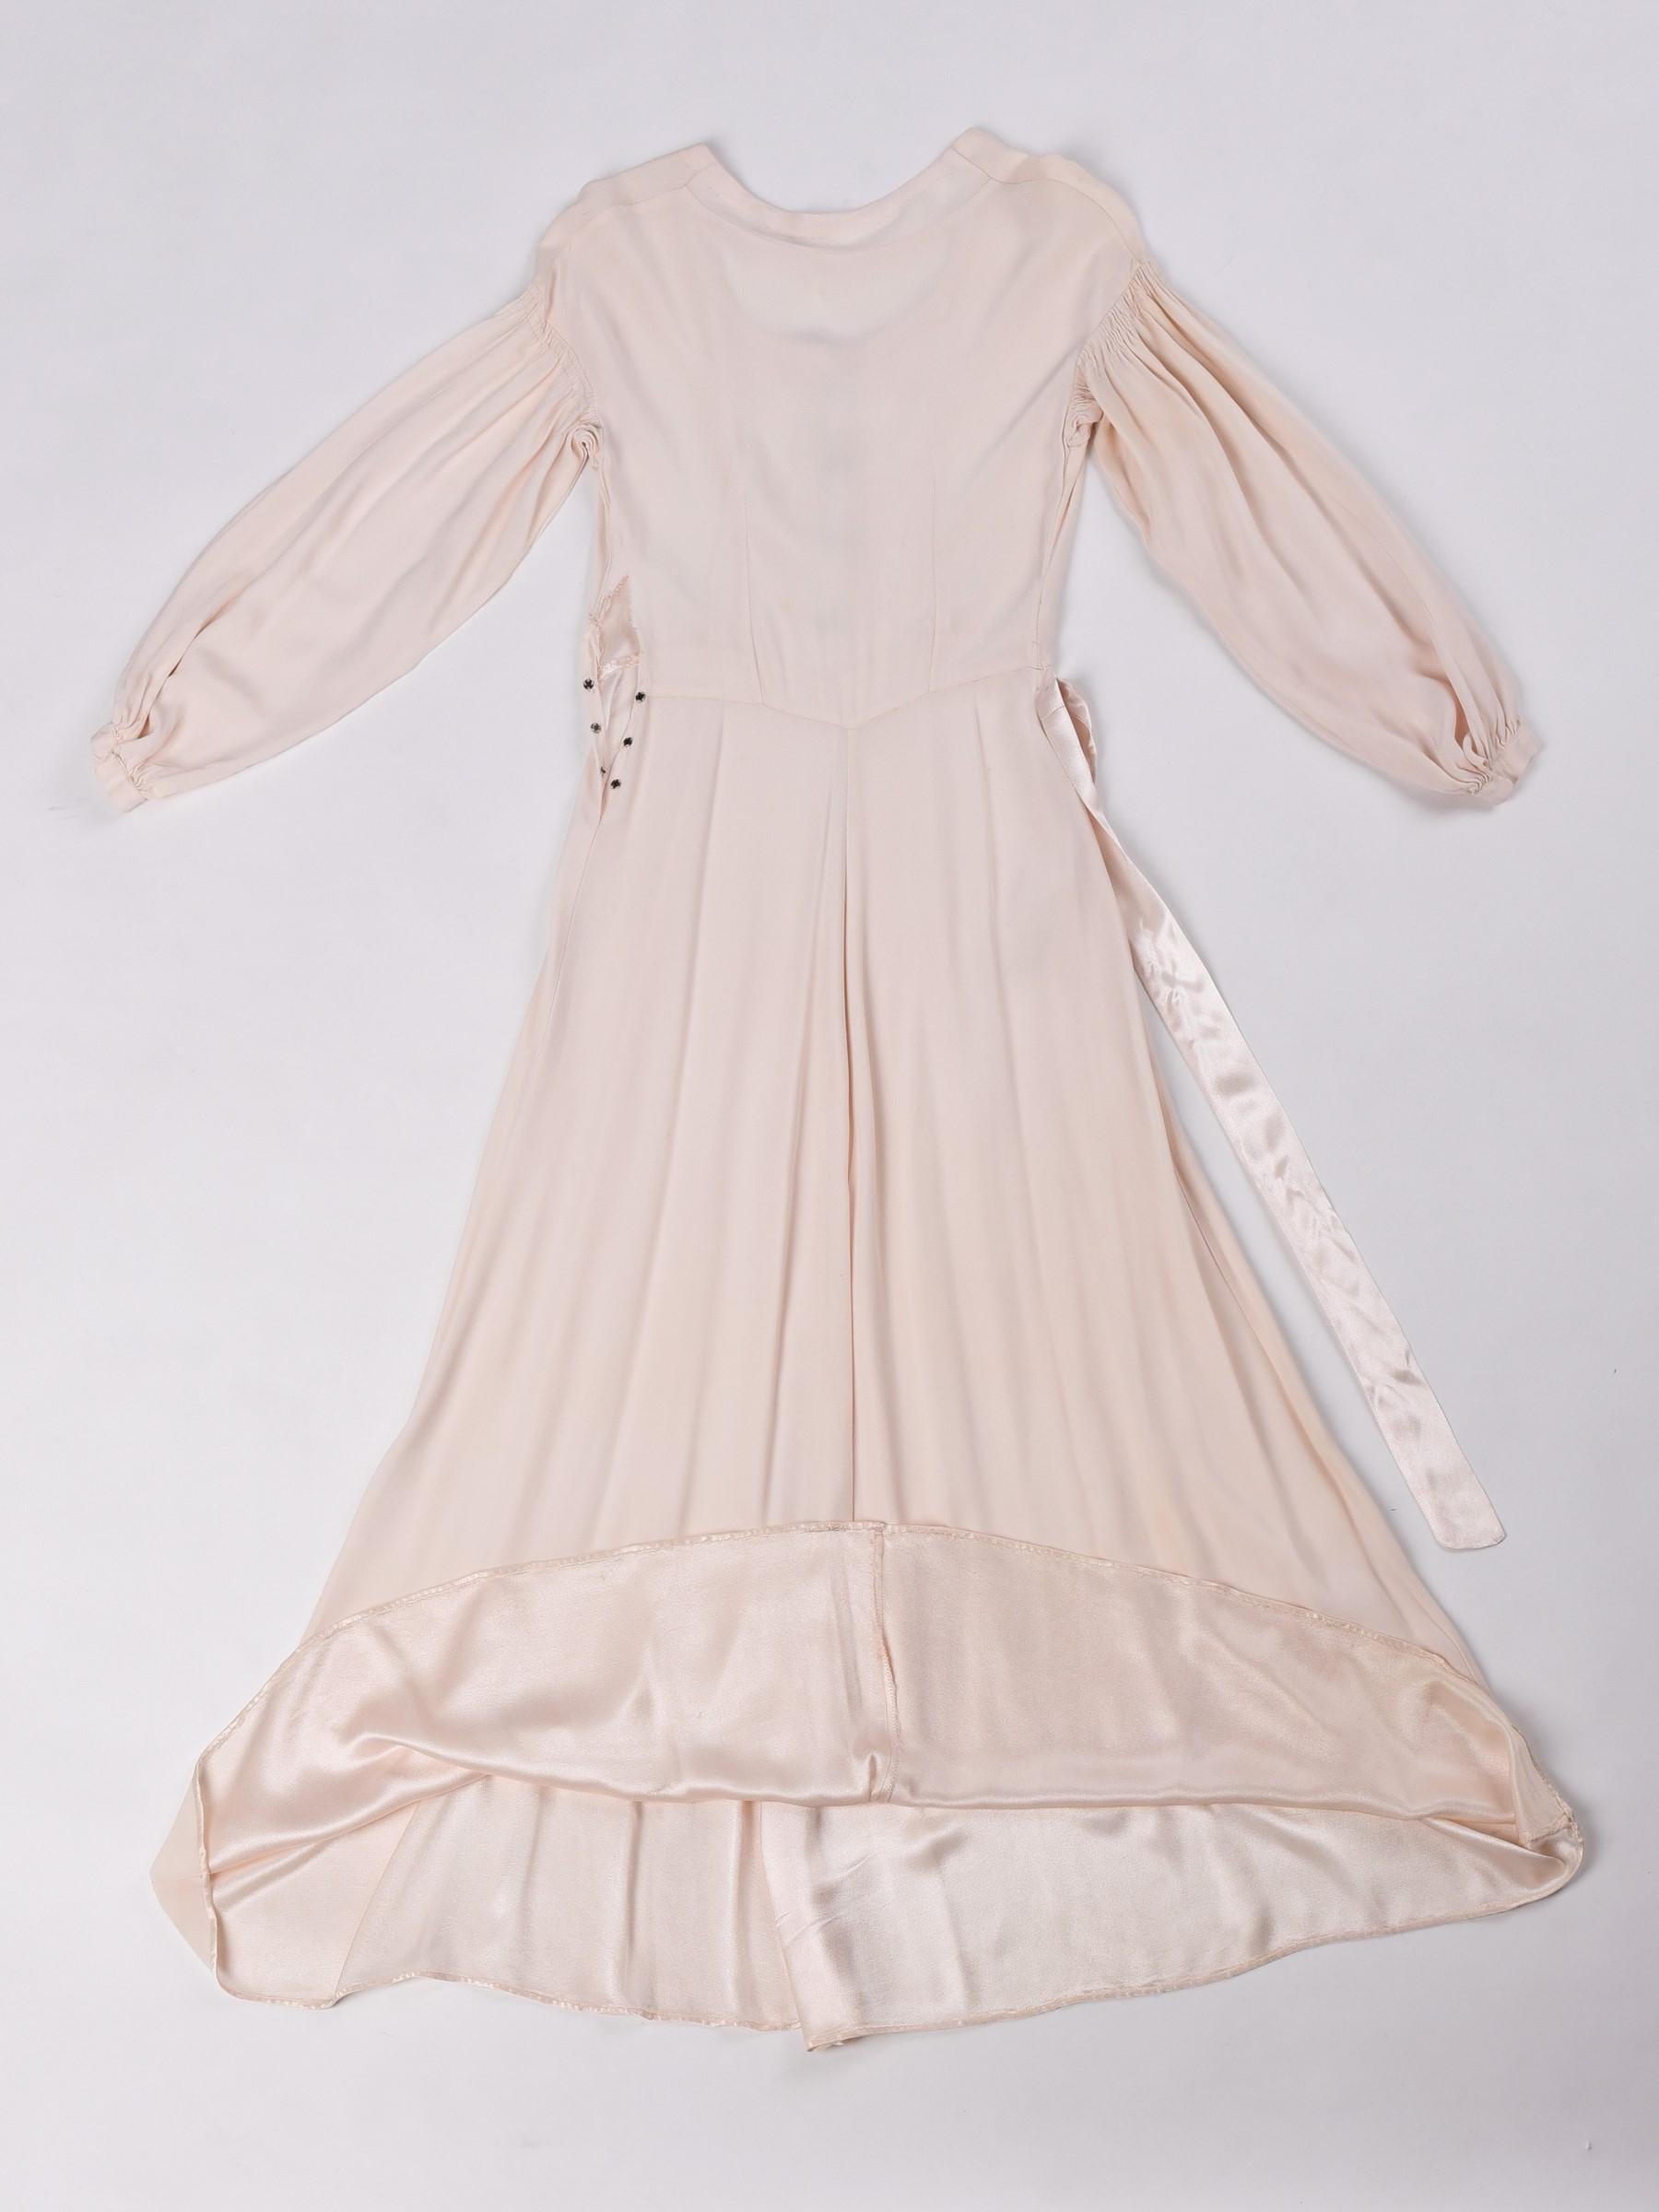 A French Powder Pink Crepe Satin Ceremonial Dress Circa 1940 For Sale 8